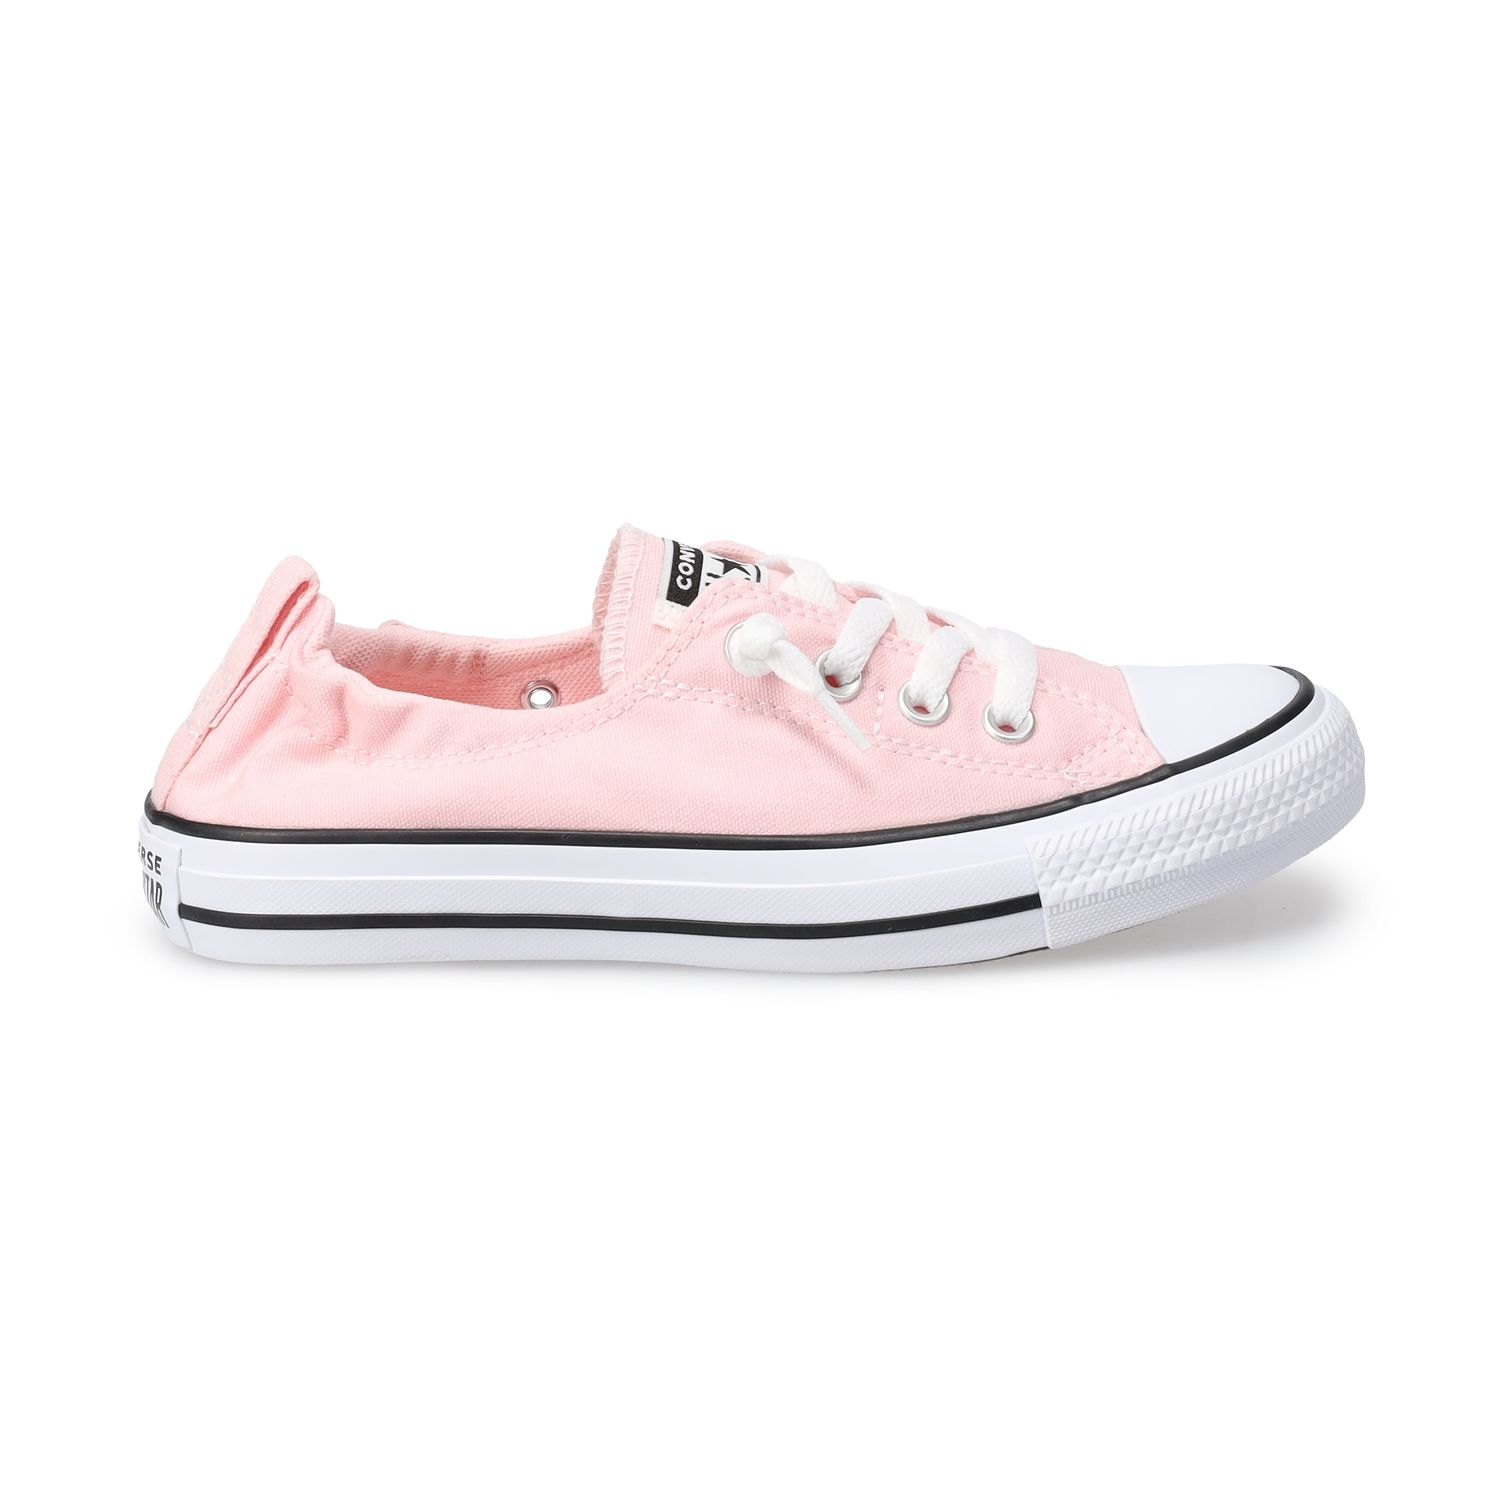 converse pull on shoes